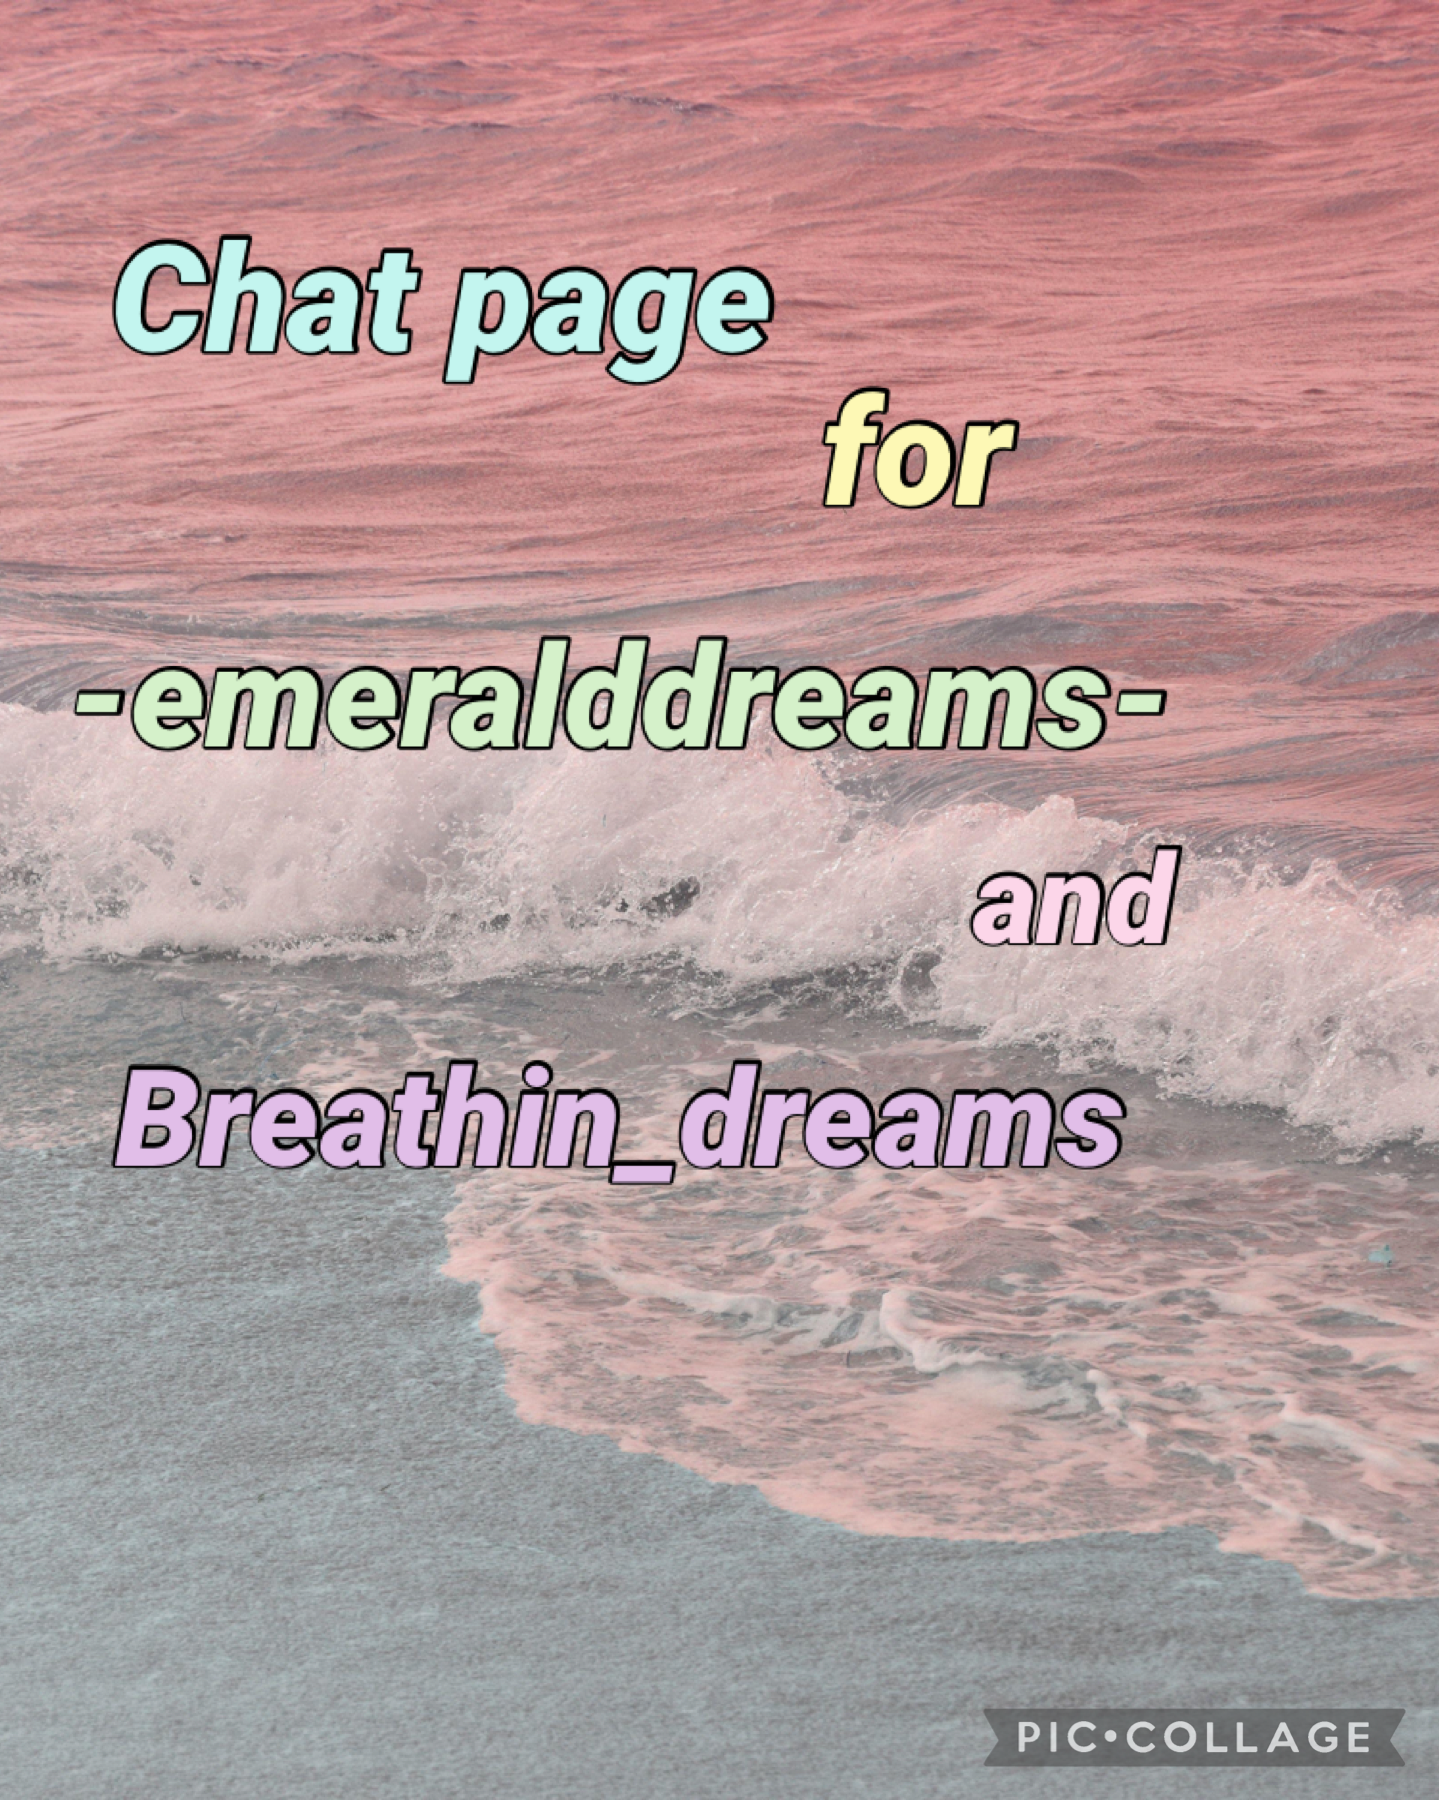 18.3.24 Chat page with -emeralddreams-